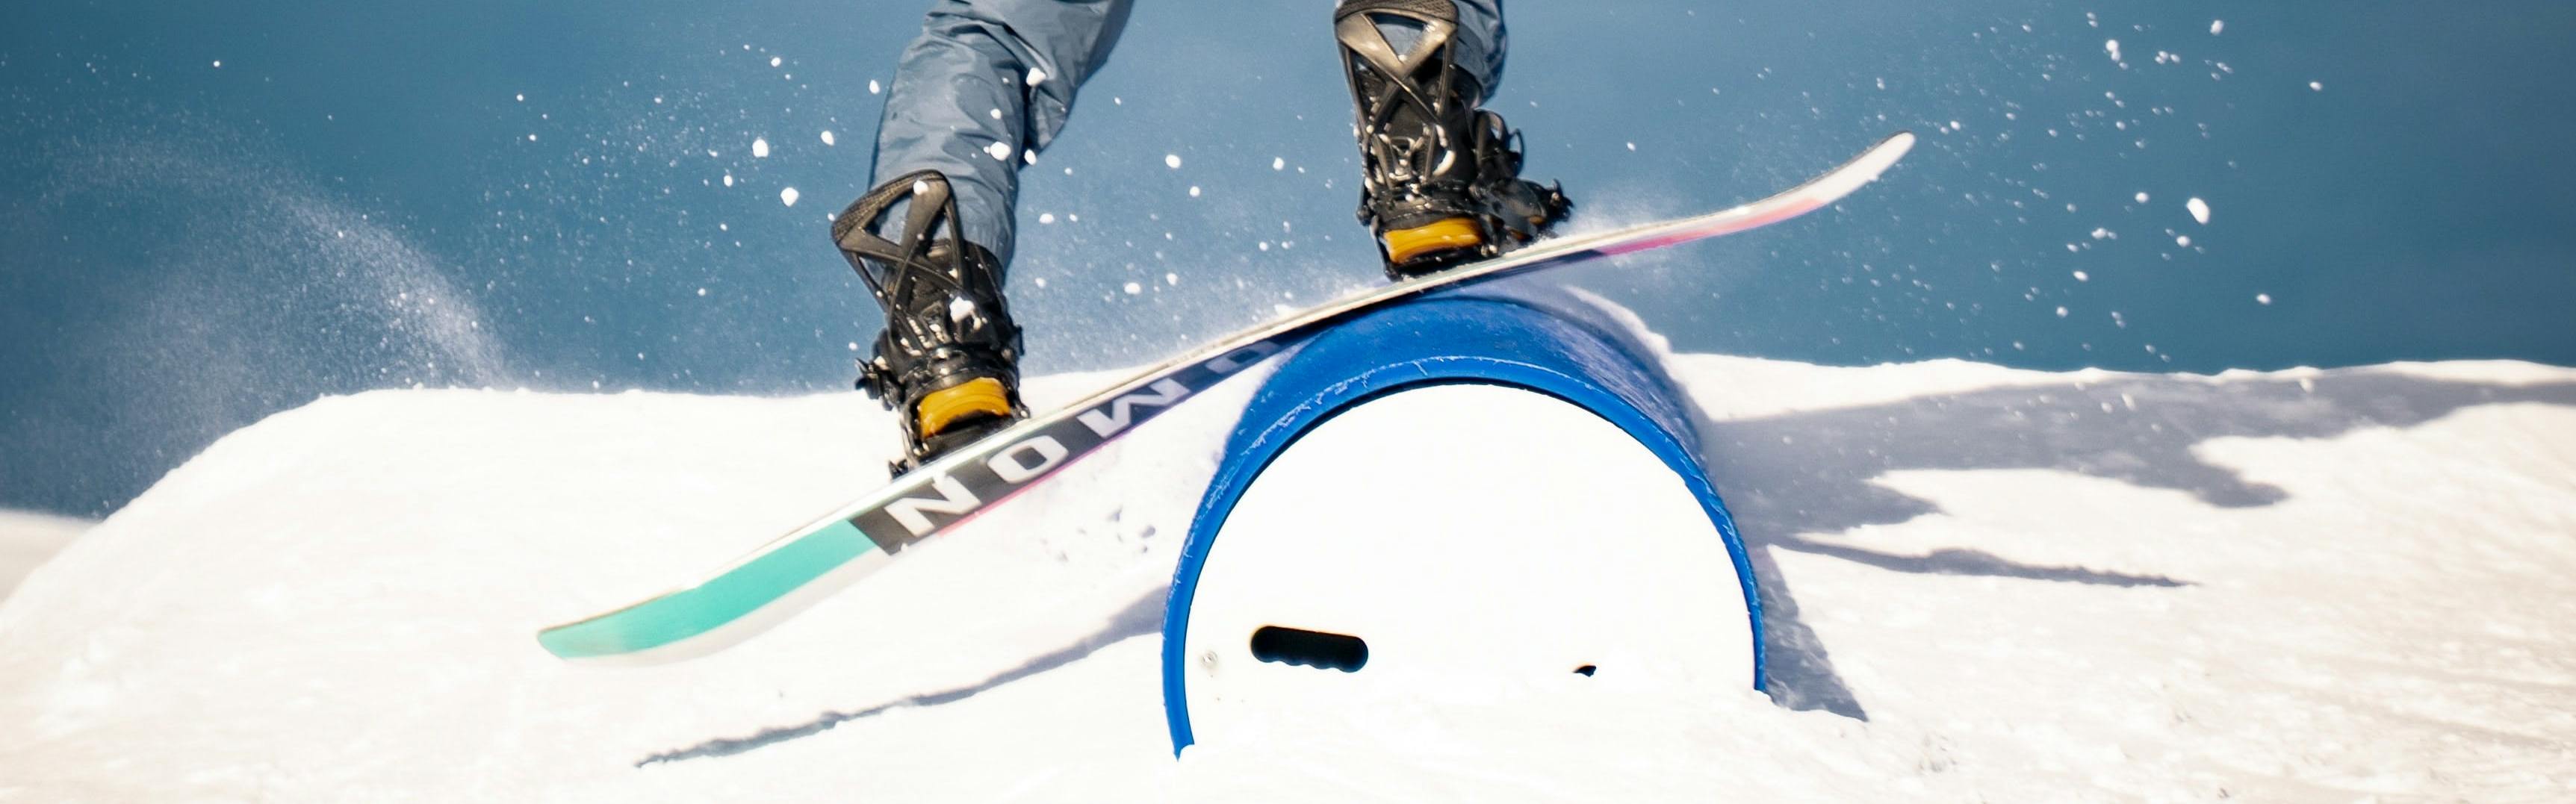 The Top 10 Snowboards for Rails